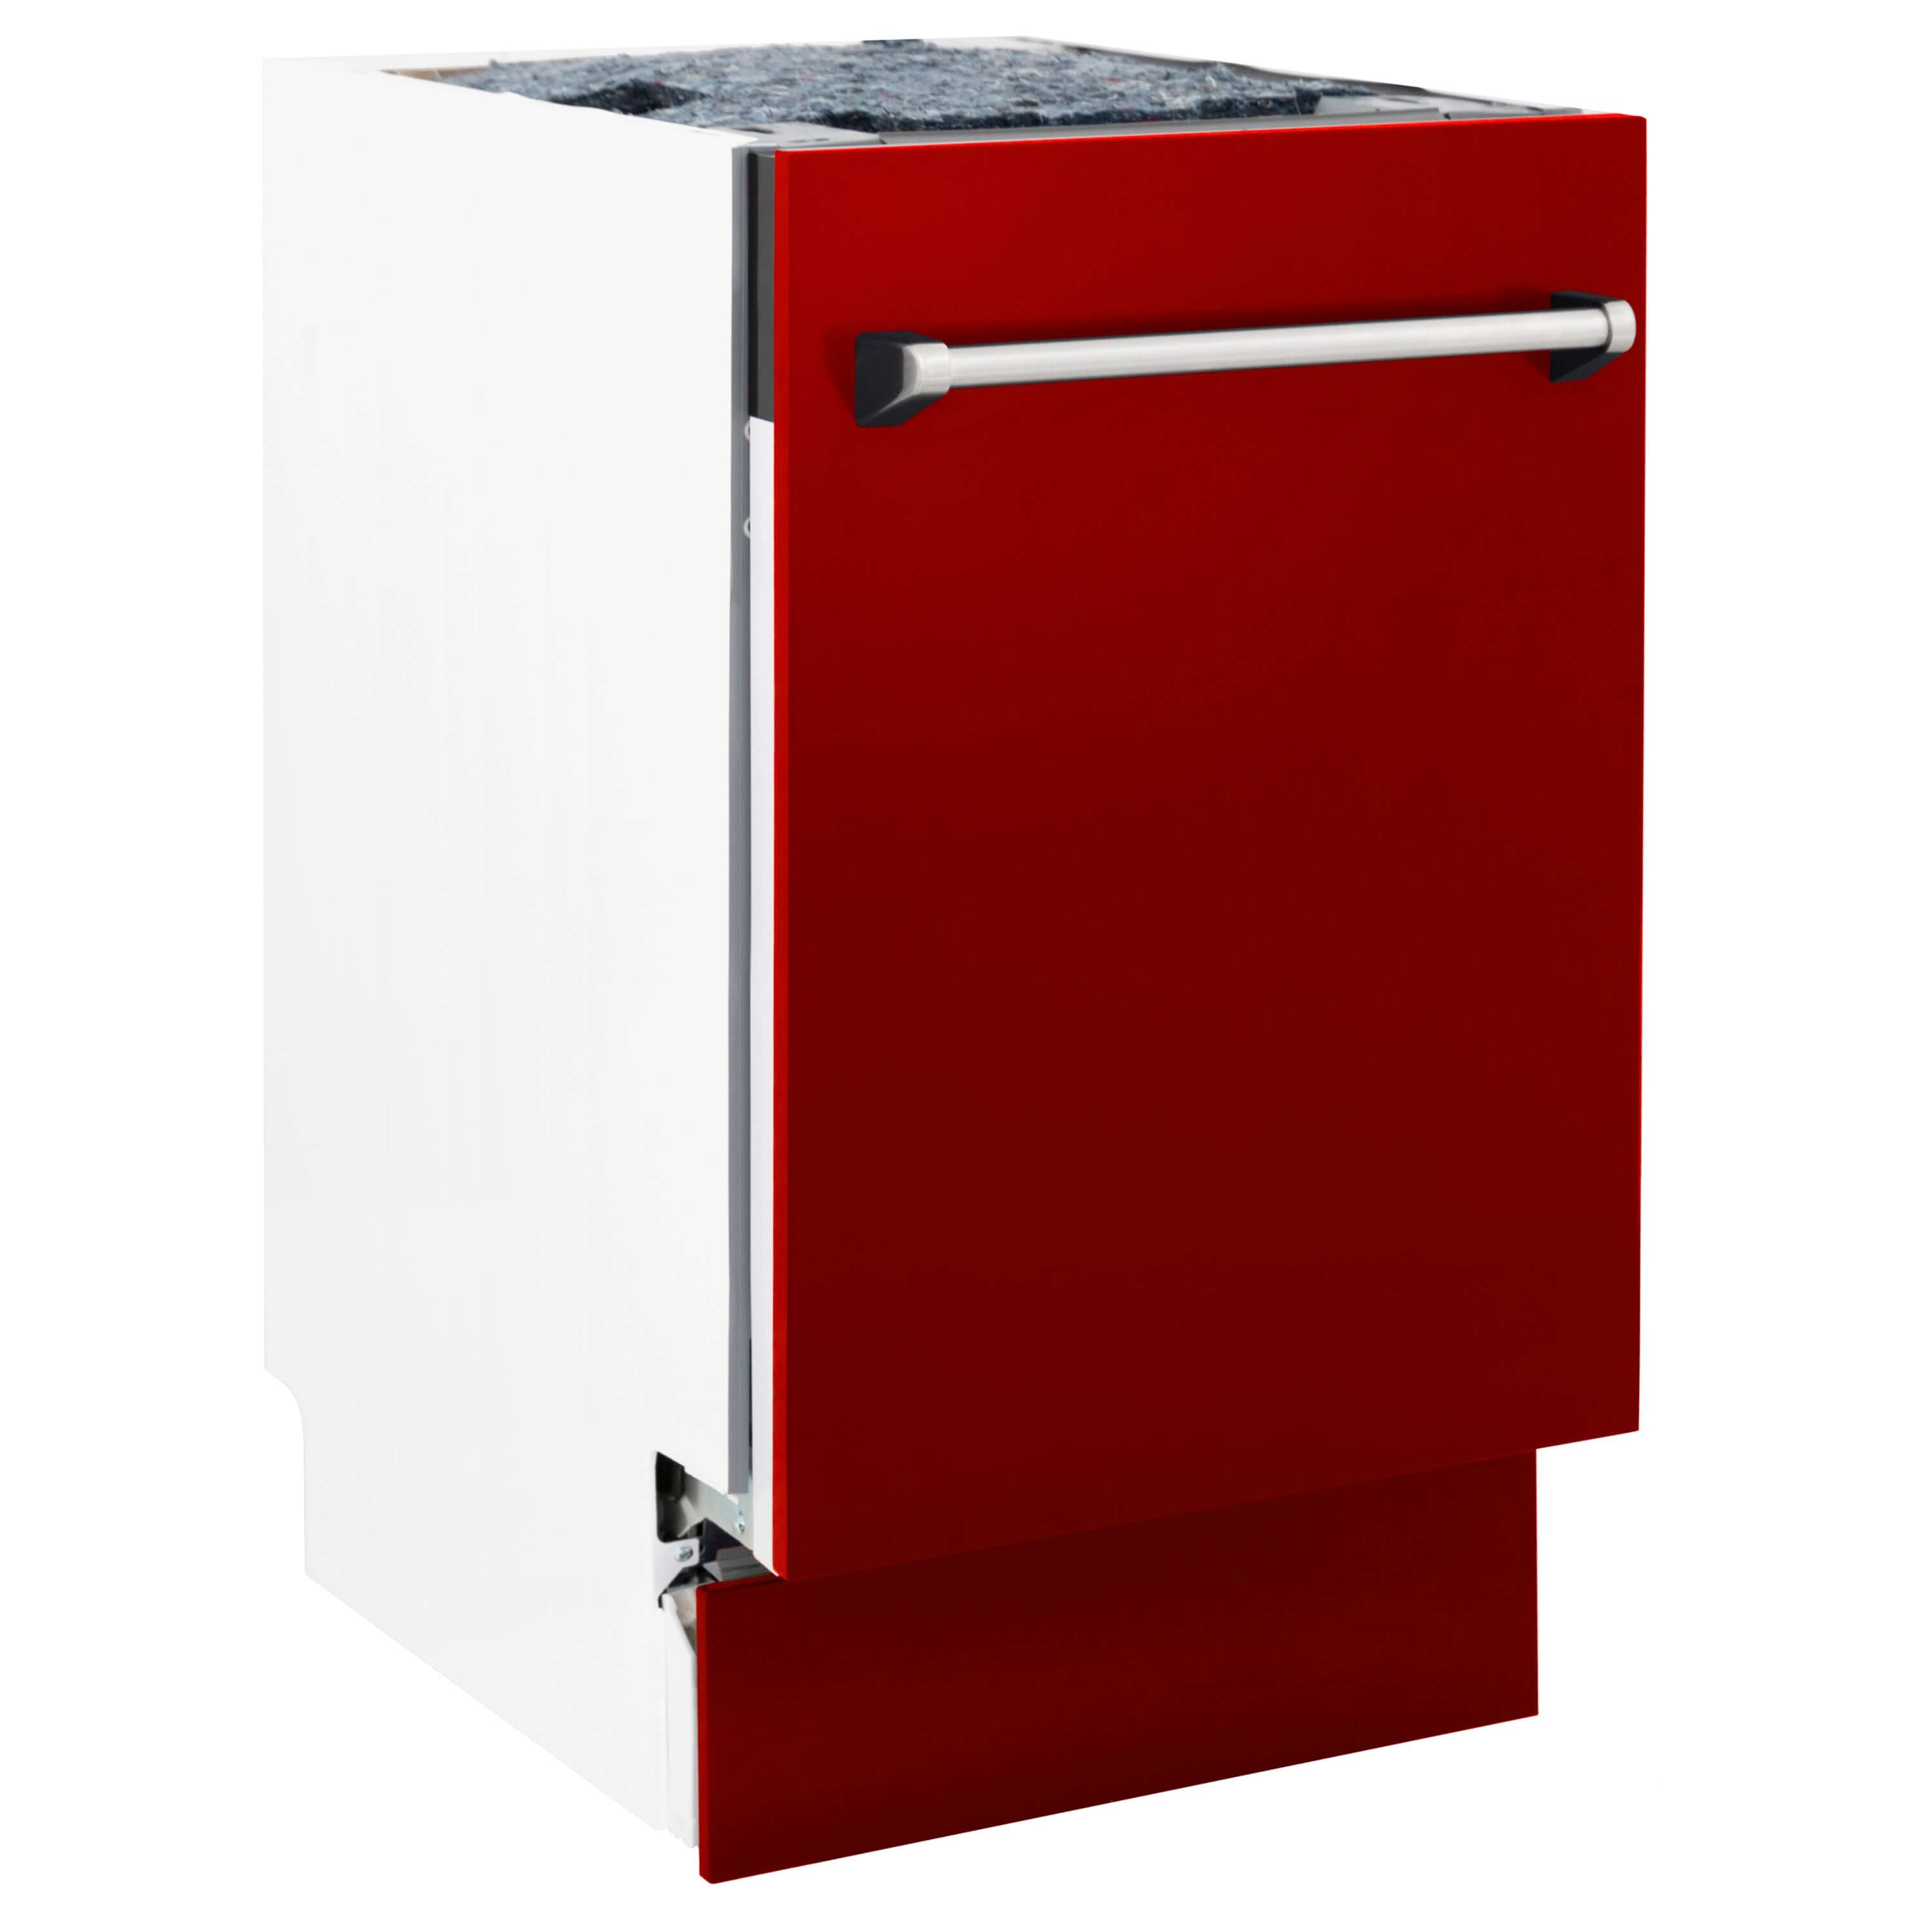 ZLINE 18 in. Tallac Series 3rd Rack Top Control Built-In Dishwasher in Red Gloss with Stainless Steel Tub, 51dBa (DWV-RG-18) front, closed.